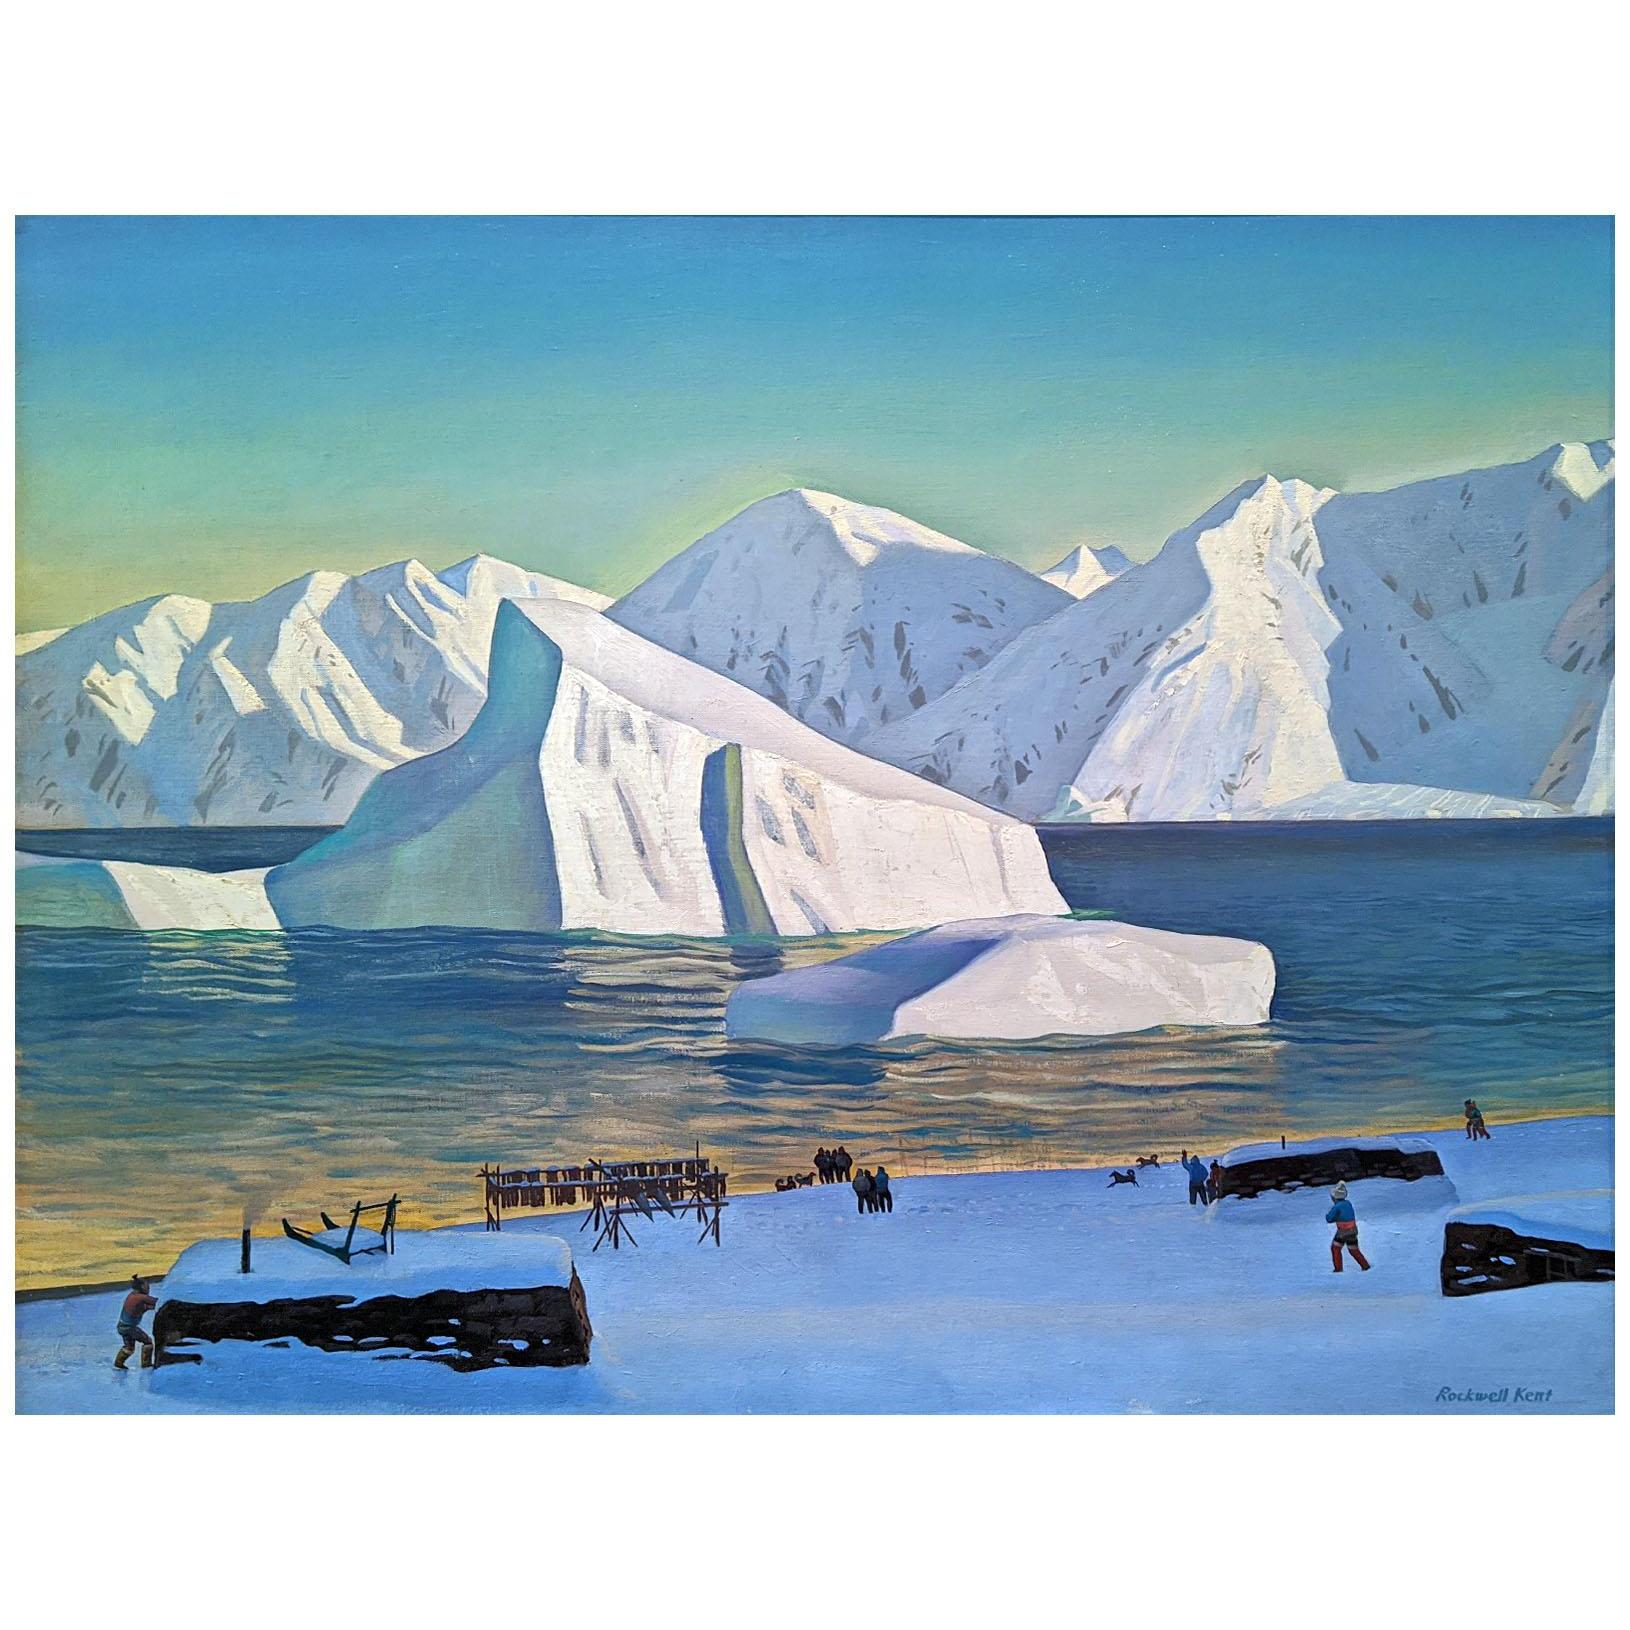 Rockwell Kent. Early November. North Greenland. 1932. Hermitage Museum